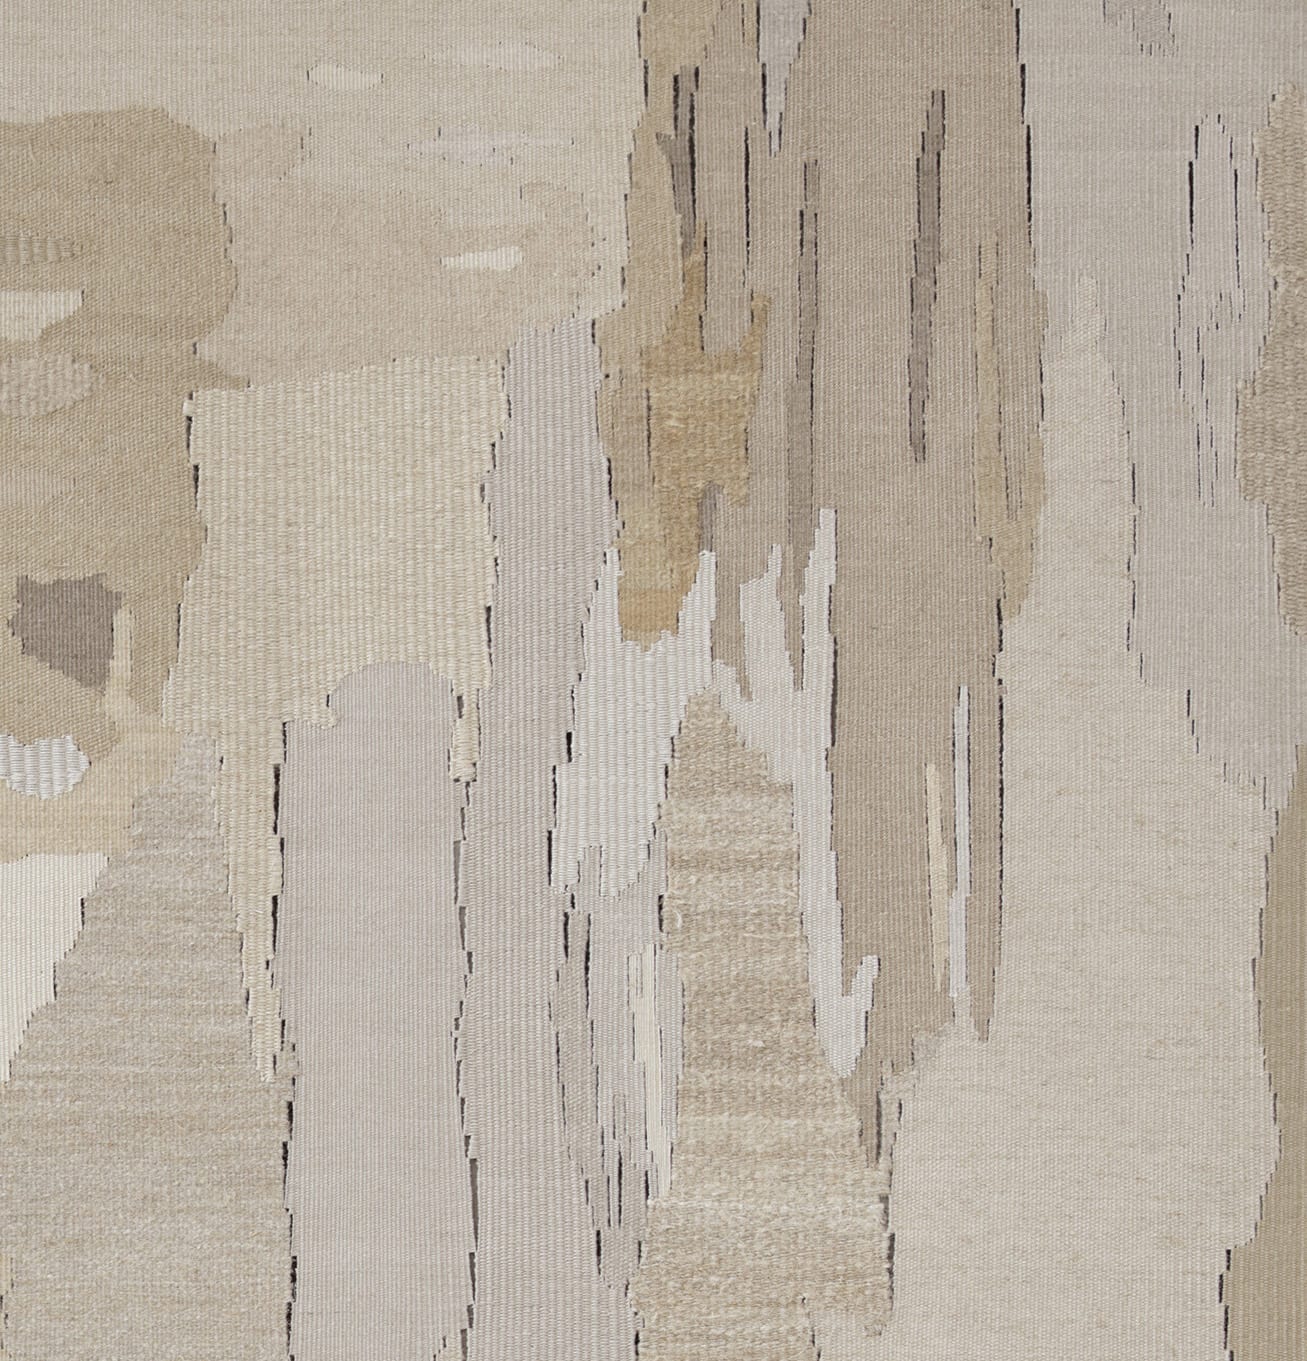 <p>Andreas Eriksson, <em>Weissensee No. 18</em>, 2019. Detail.</p><h3>"Territories of the finished tapestries might be distinguished by a particular knotted texture or the stands of long fibre sprouting from the surface. Andreas has described the tapestries as ‘existential landscapes’. We might also see them as a conceptual extension of painting in which the picture migrates to the canvas itself." </h3><p><strong>- Hettie Judah on Andreas Eriksson, 2020</strong></p>